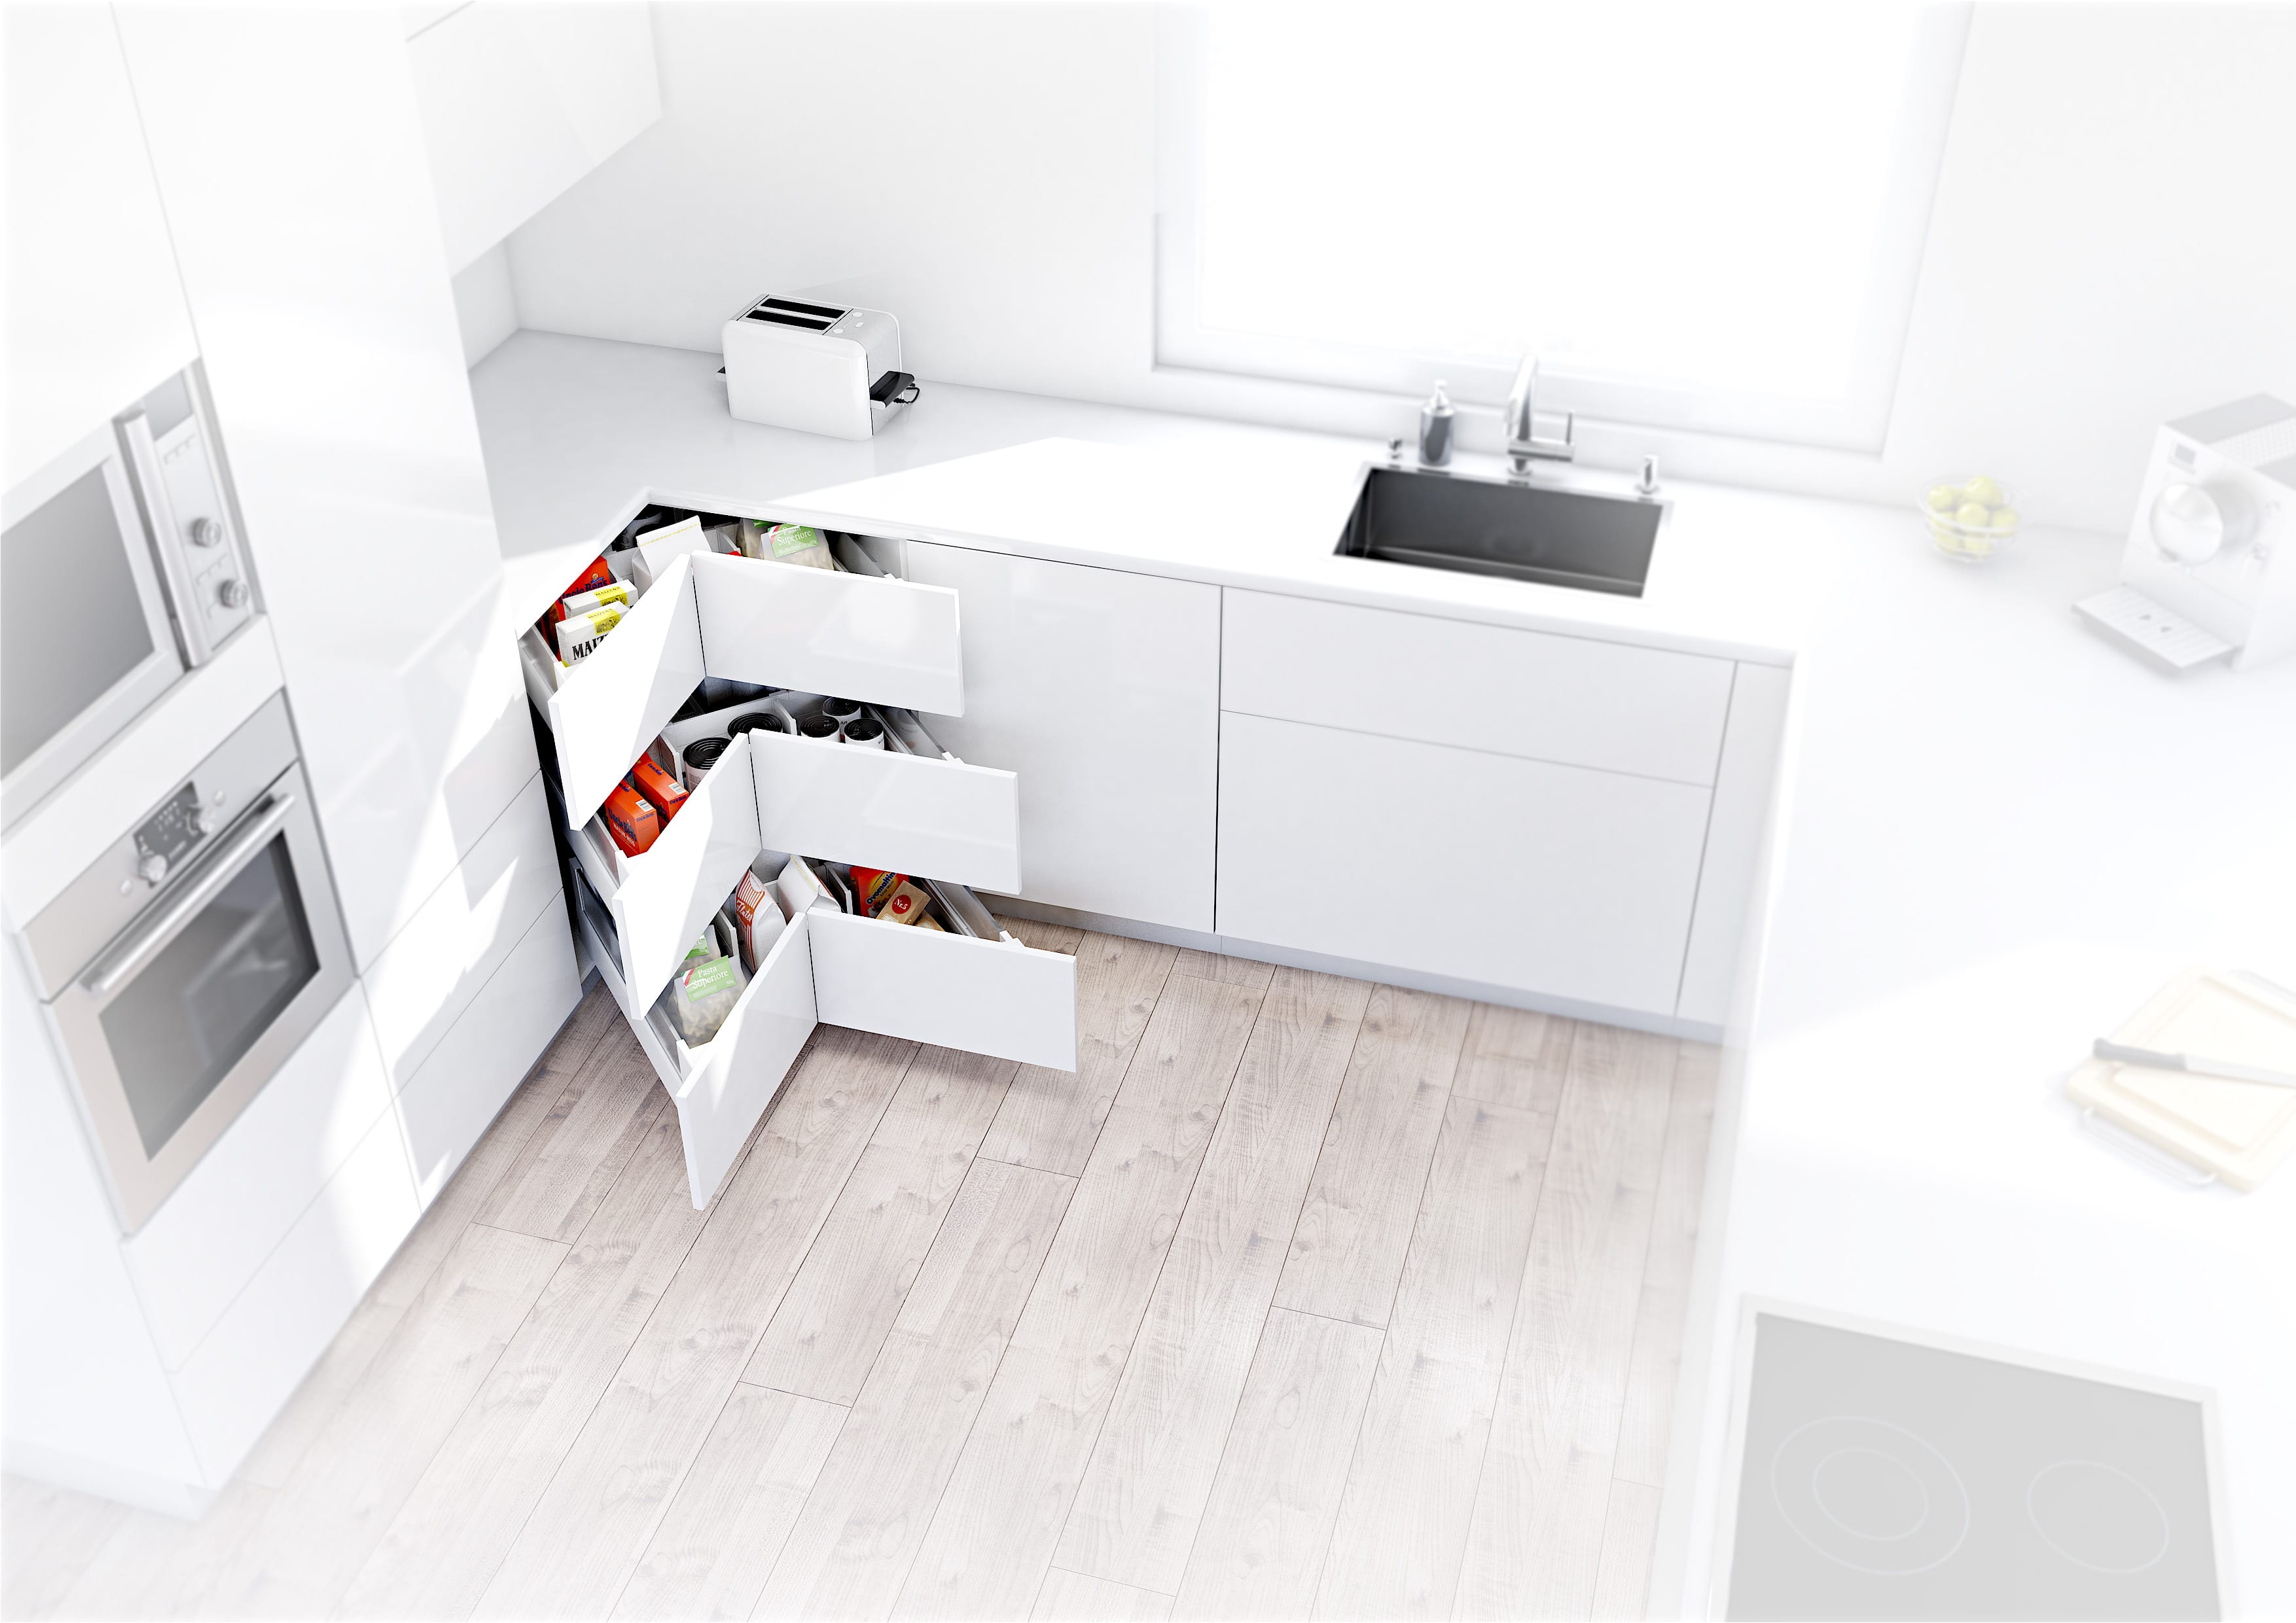 Fittings Solutions By Blum, How Much Does Blum Kitchen Cost